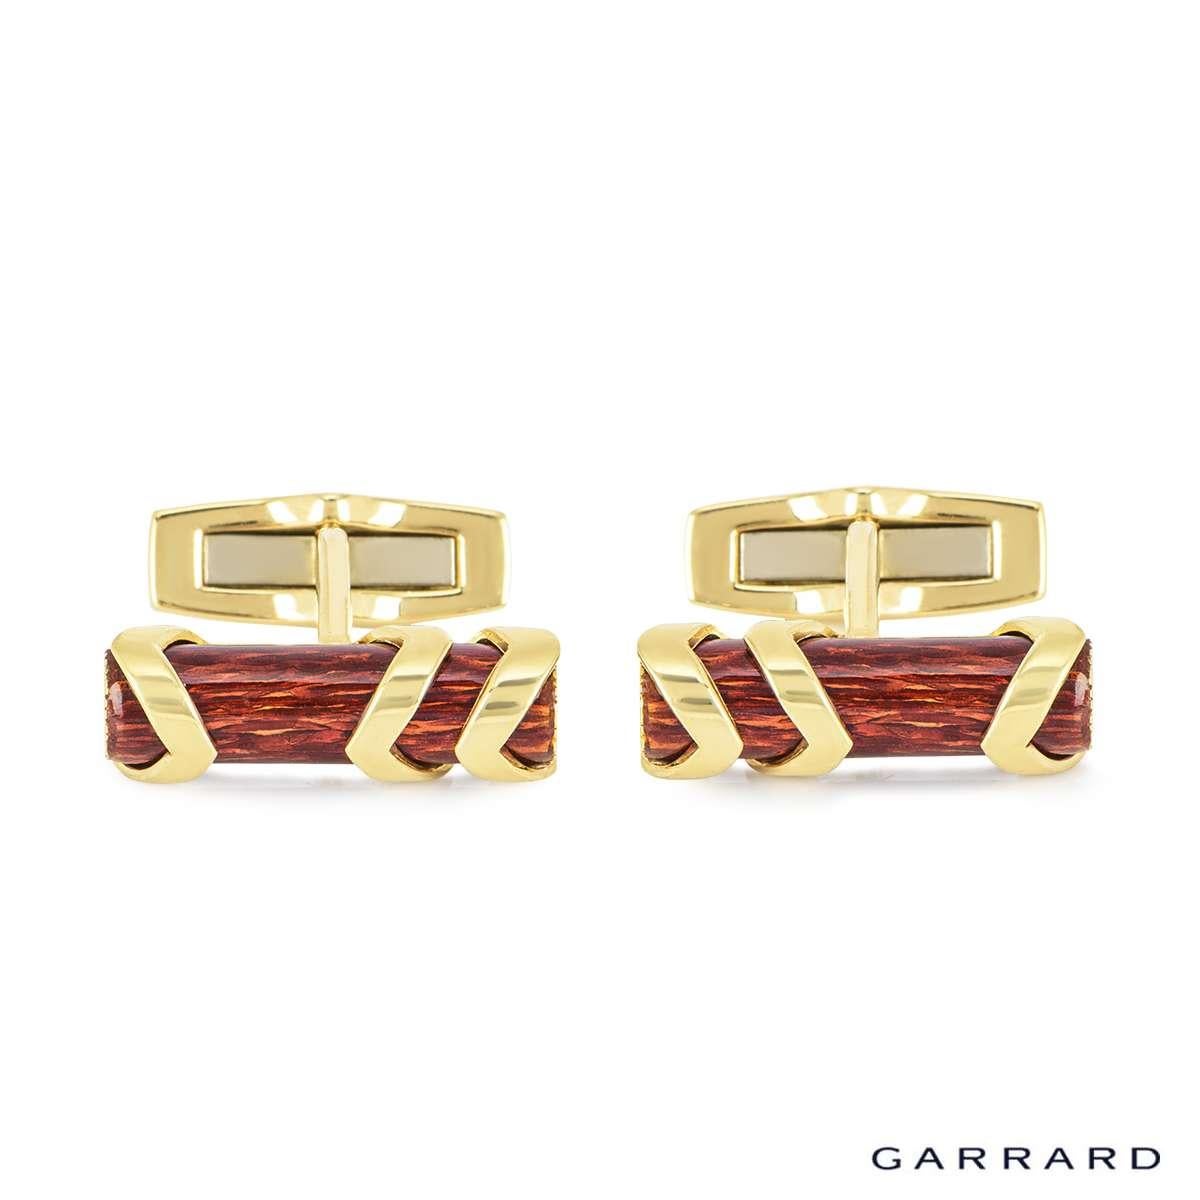 A pair of 18k yellow gold enamel log cufflinks by Garrard. The cufflinks are each set with a mahogany enamel log motif centre with a bark design finish and are encased by three supporting shaped panels and are finished with a classic hinged T bar